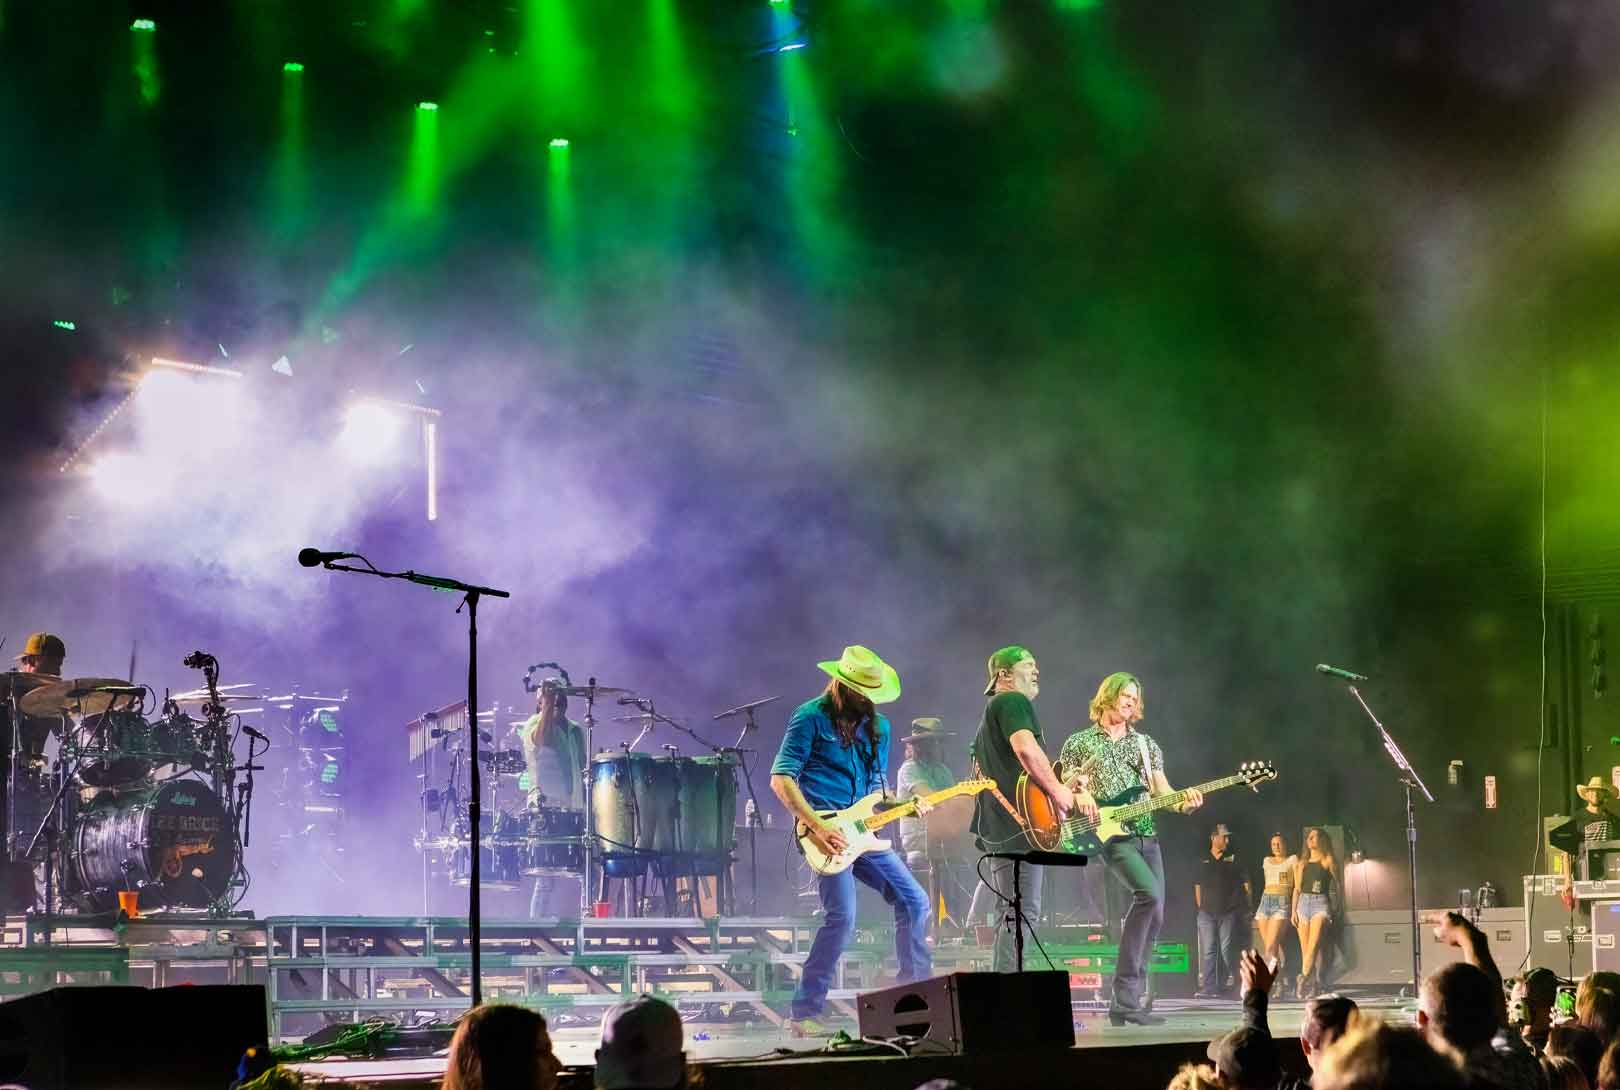 Lee Brice playing live onstage under green purple and white lights with his band